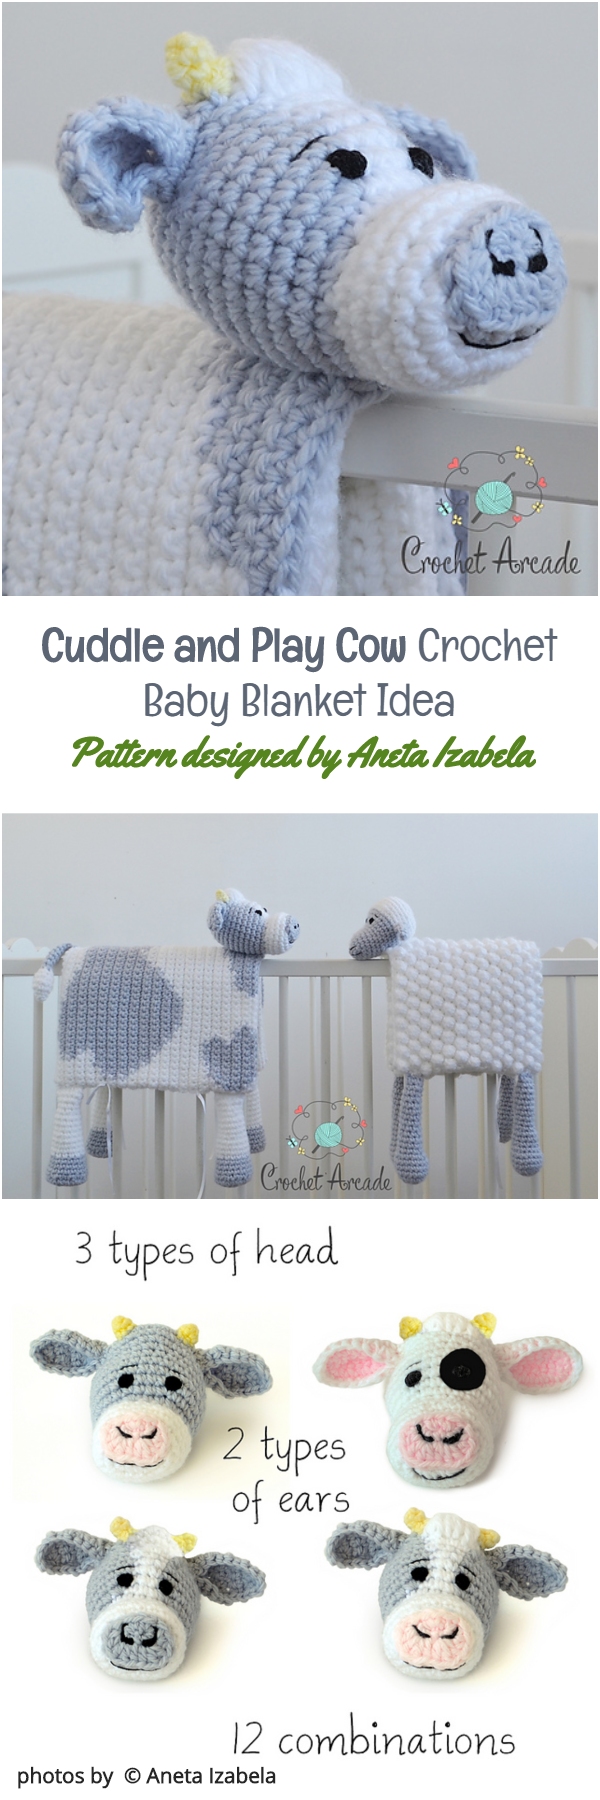 Cuddle and Play Cow Crochet Baby Blanket Idea Pattern designed by Aneta Izabela